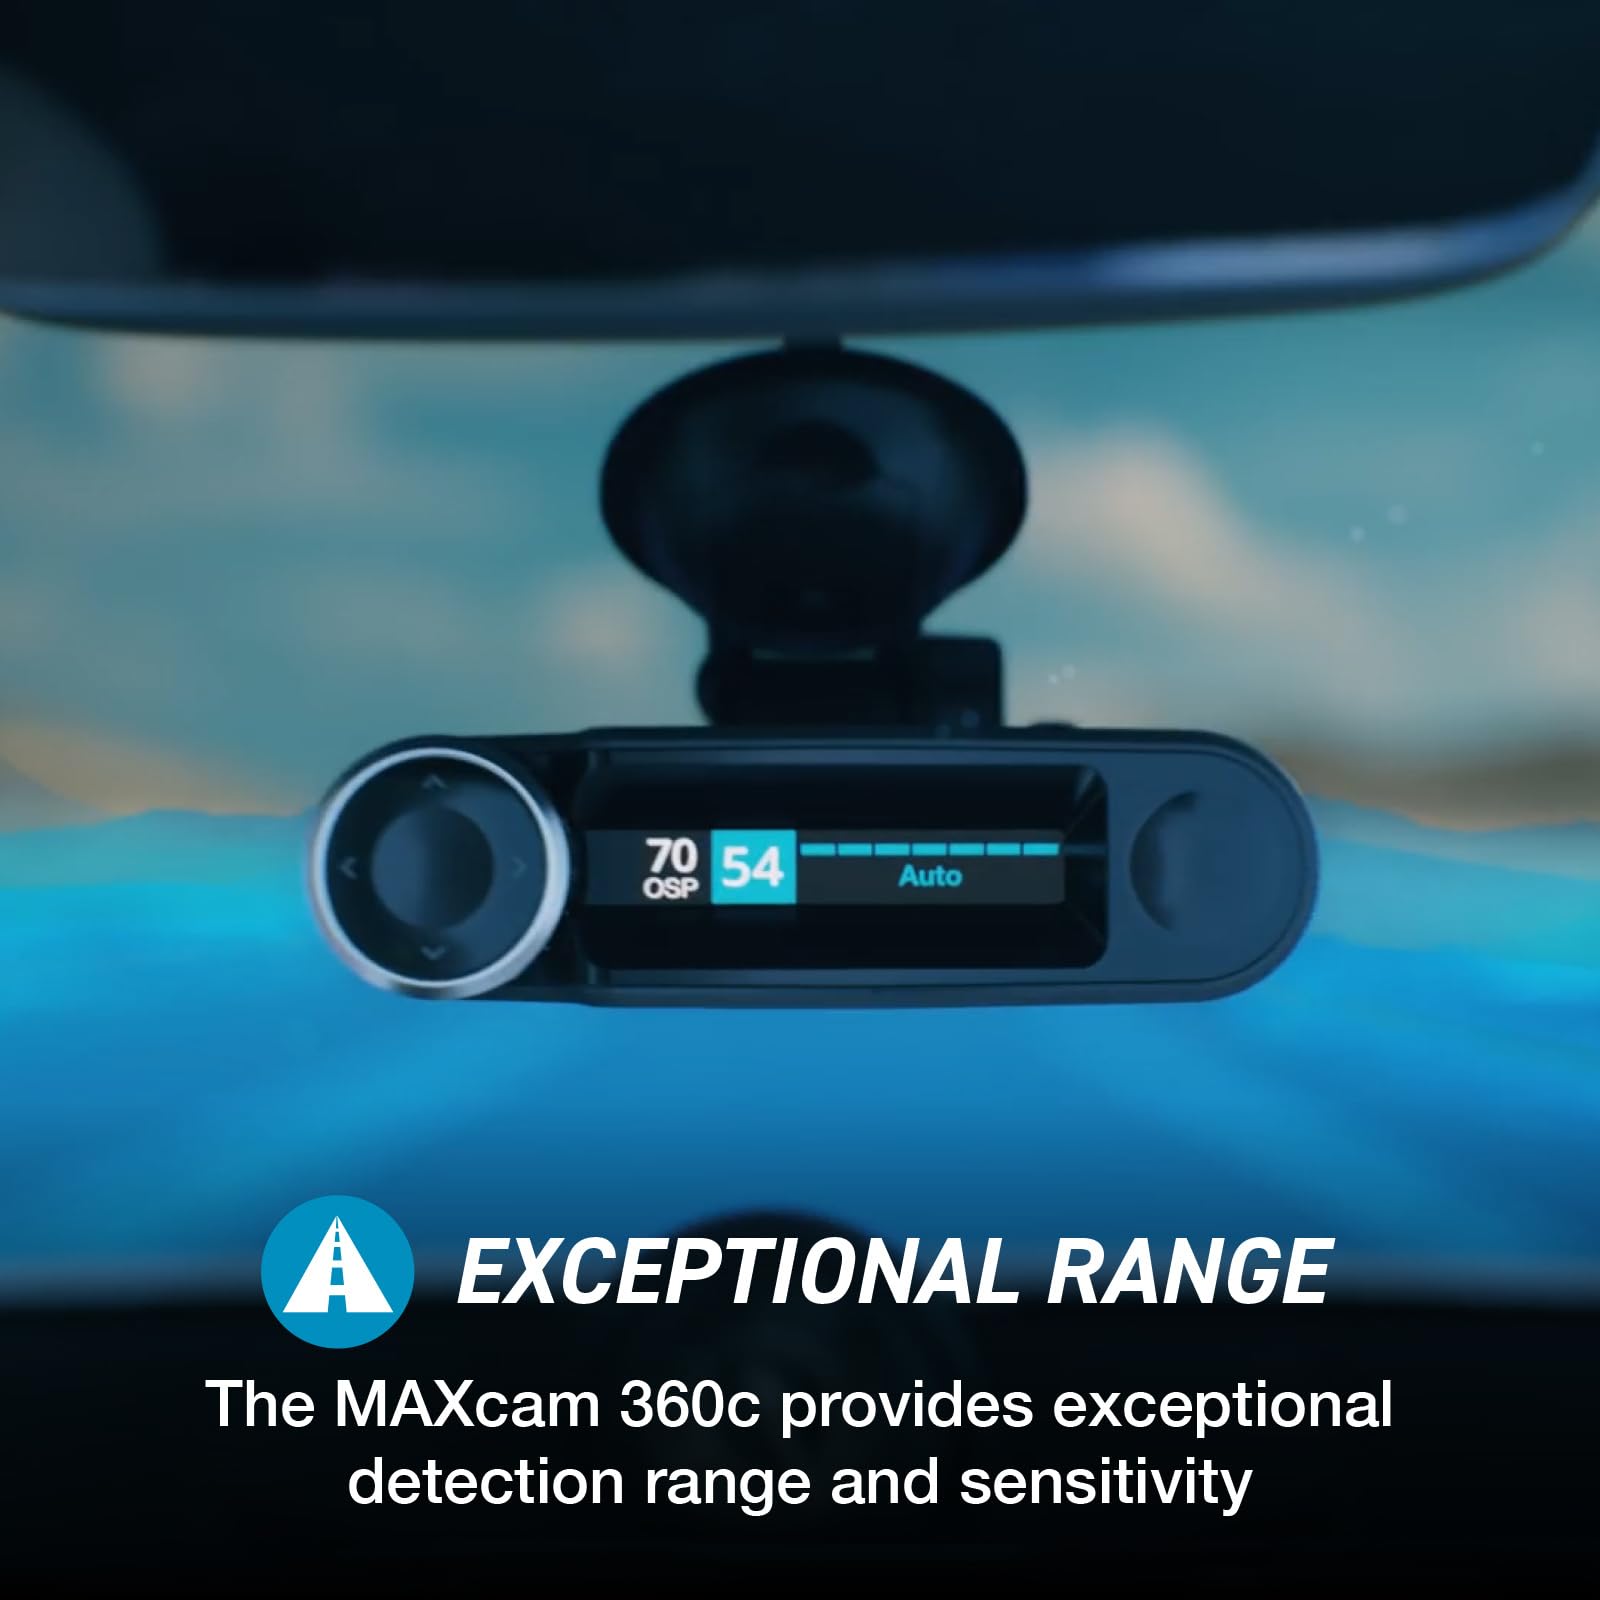 Escort MAXcam 360c Laser Radar Detector and Dash Camera - Great Range, 360° Protection, Shared Alerts, Incident Reports, Emergency MayDay, Driver Smarter App, Dual-Band Wi-Fi, 16GB SD Card Included